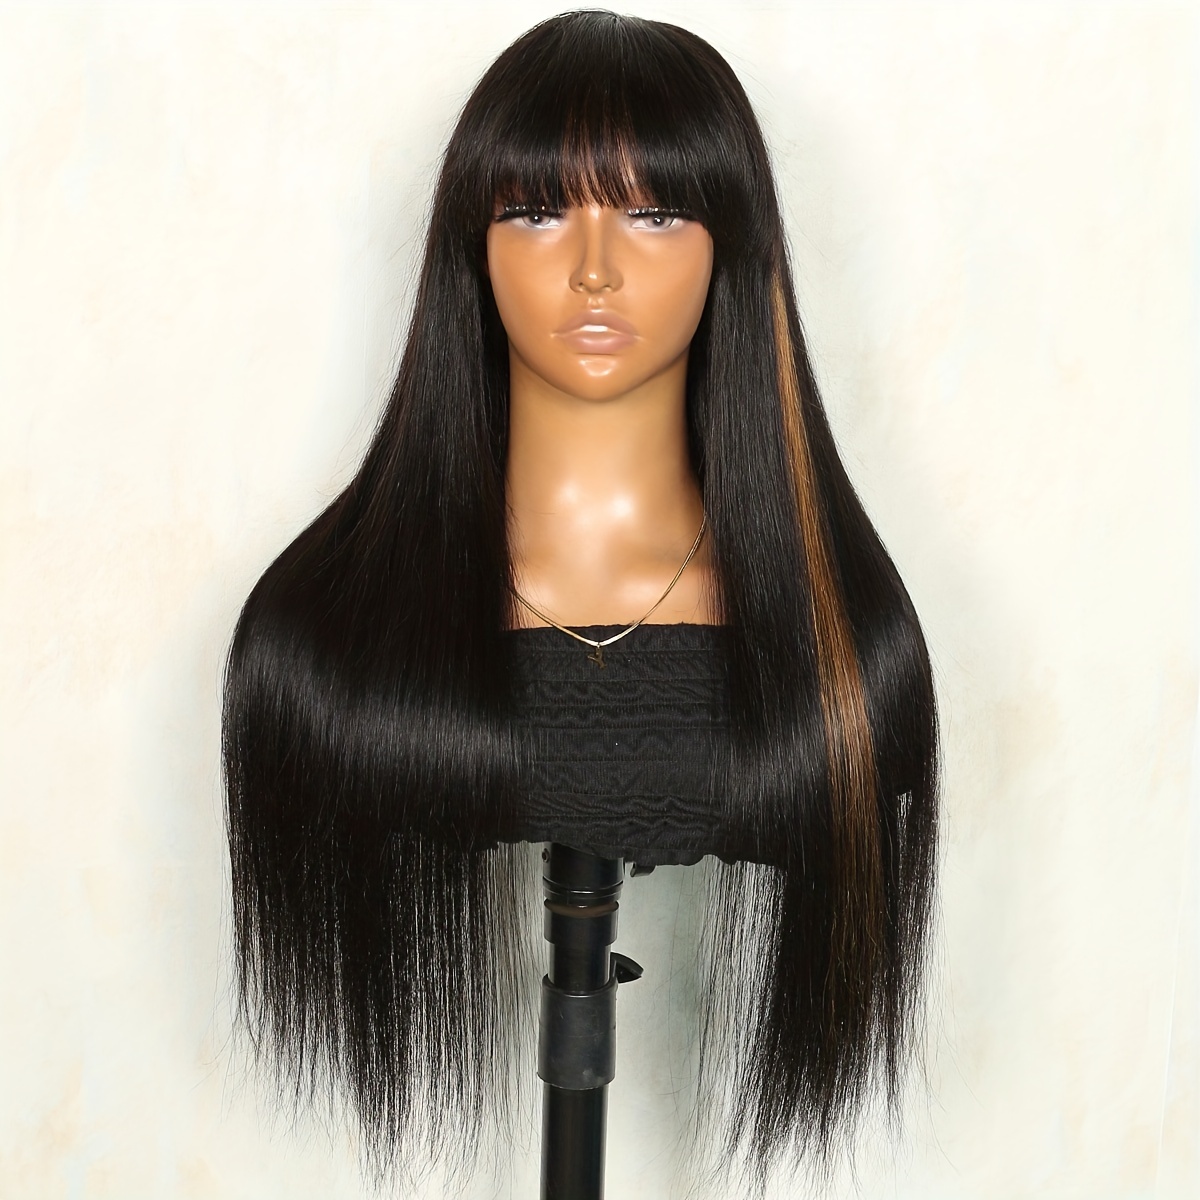 

Black And Brown Mixed Color None Lace Wigs Straight Human Hair Wigs With Bangs For Woman Full Machine Made Wigs Brazilian Remy Human Hair Wigs 100% Human Hair Wigs